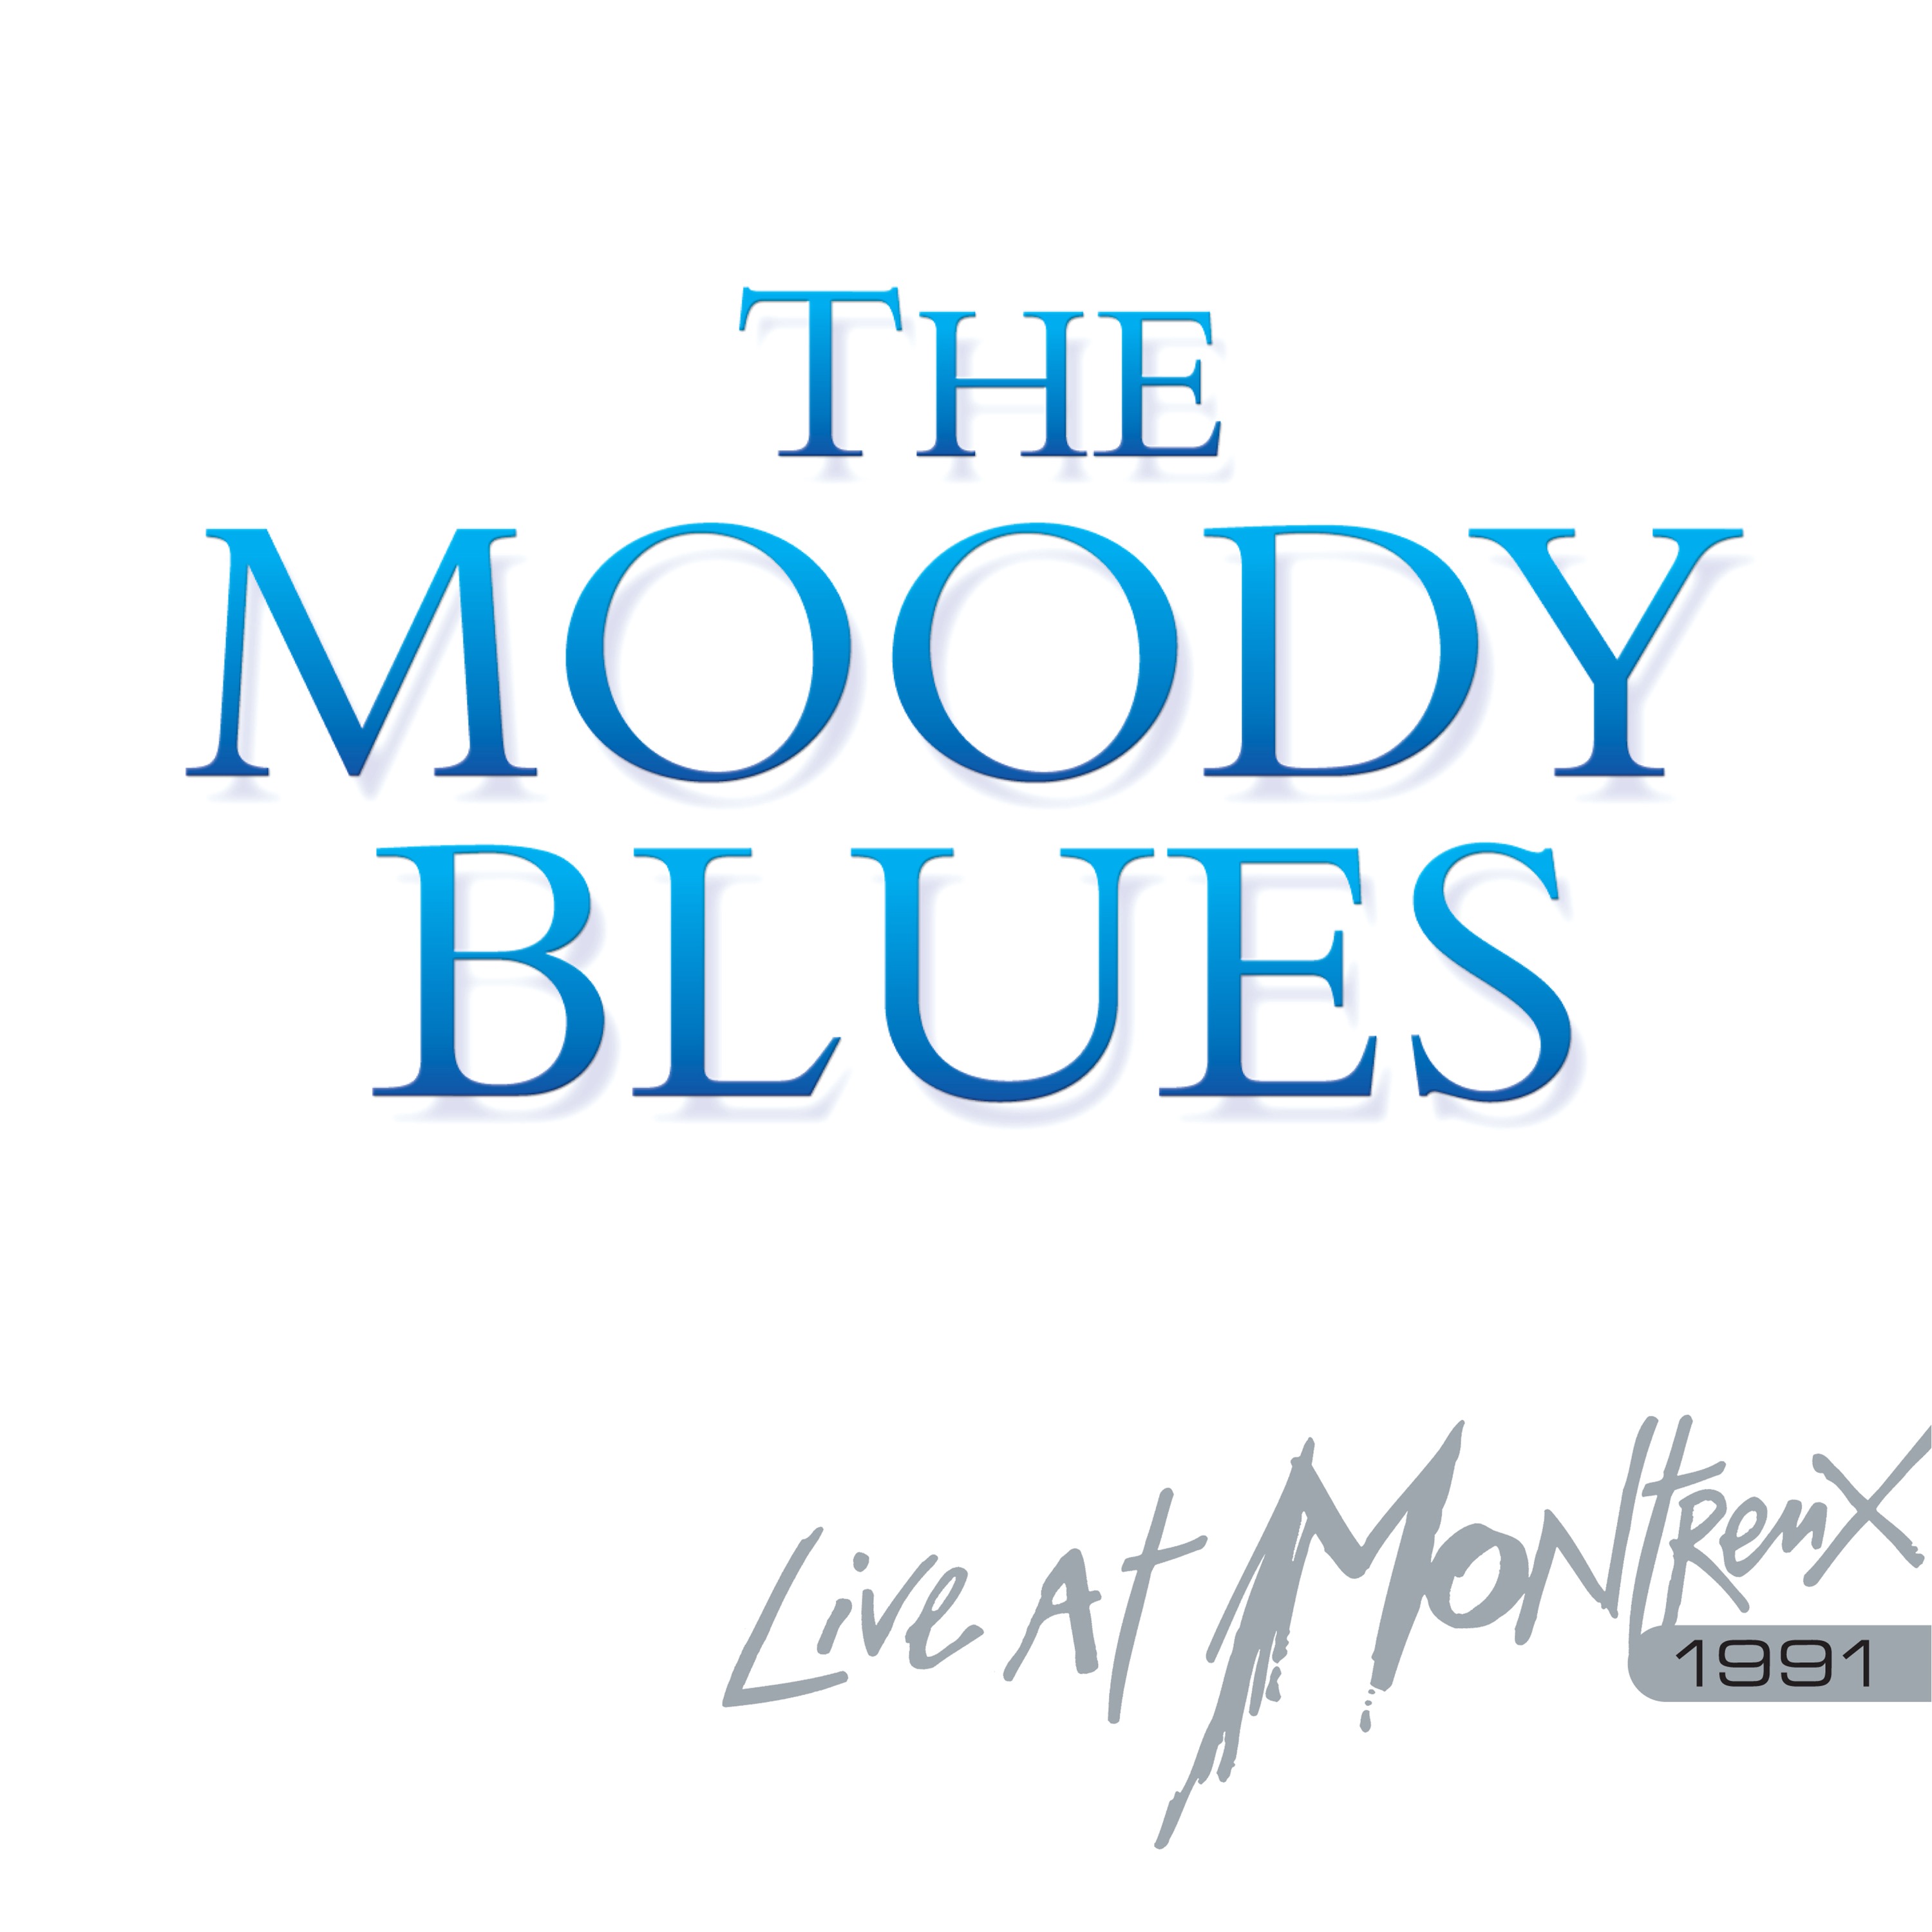 Moody Blues - Live At Montreux 1991 - CD+DVD